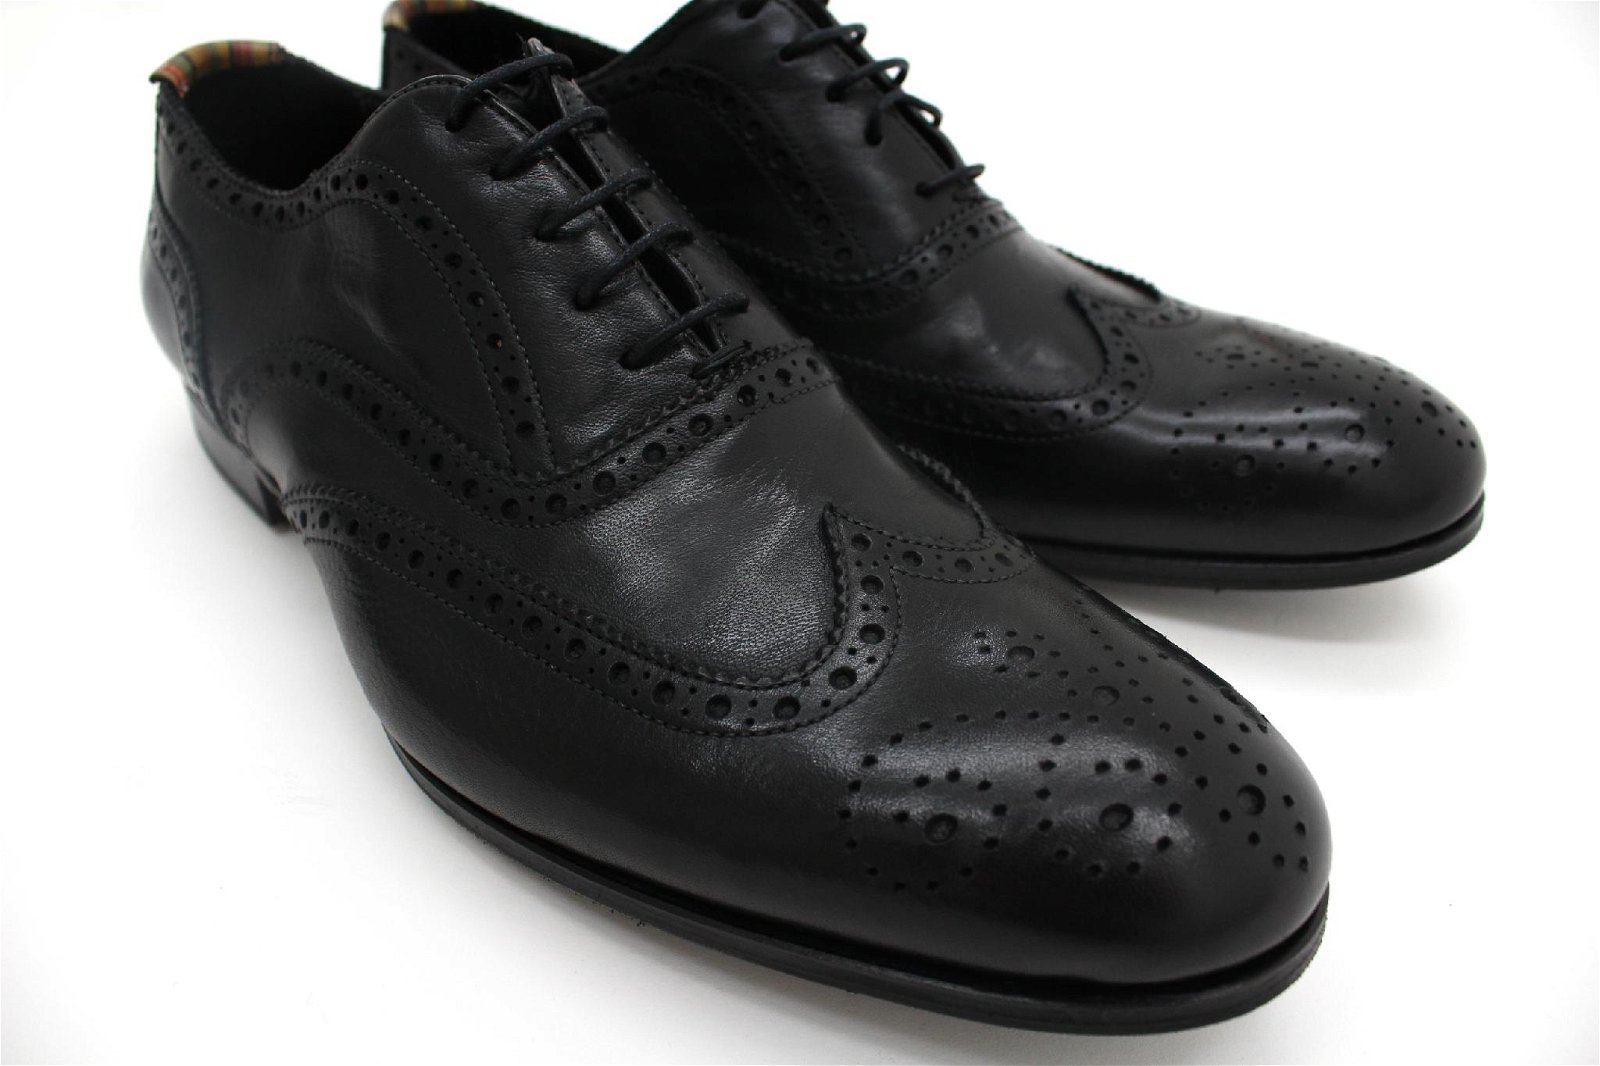 PURE LEATHER SHOES